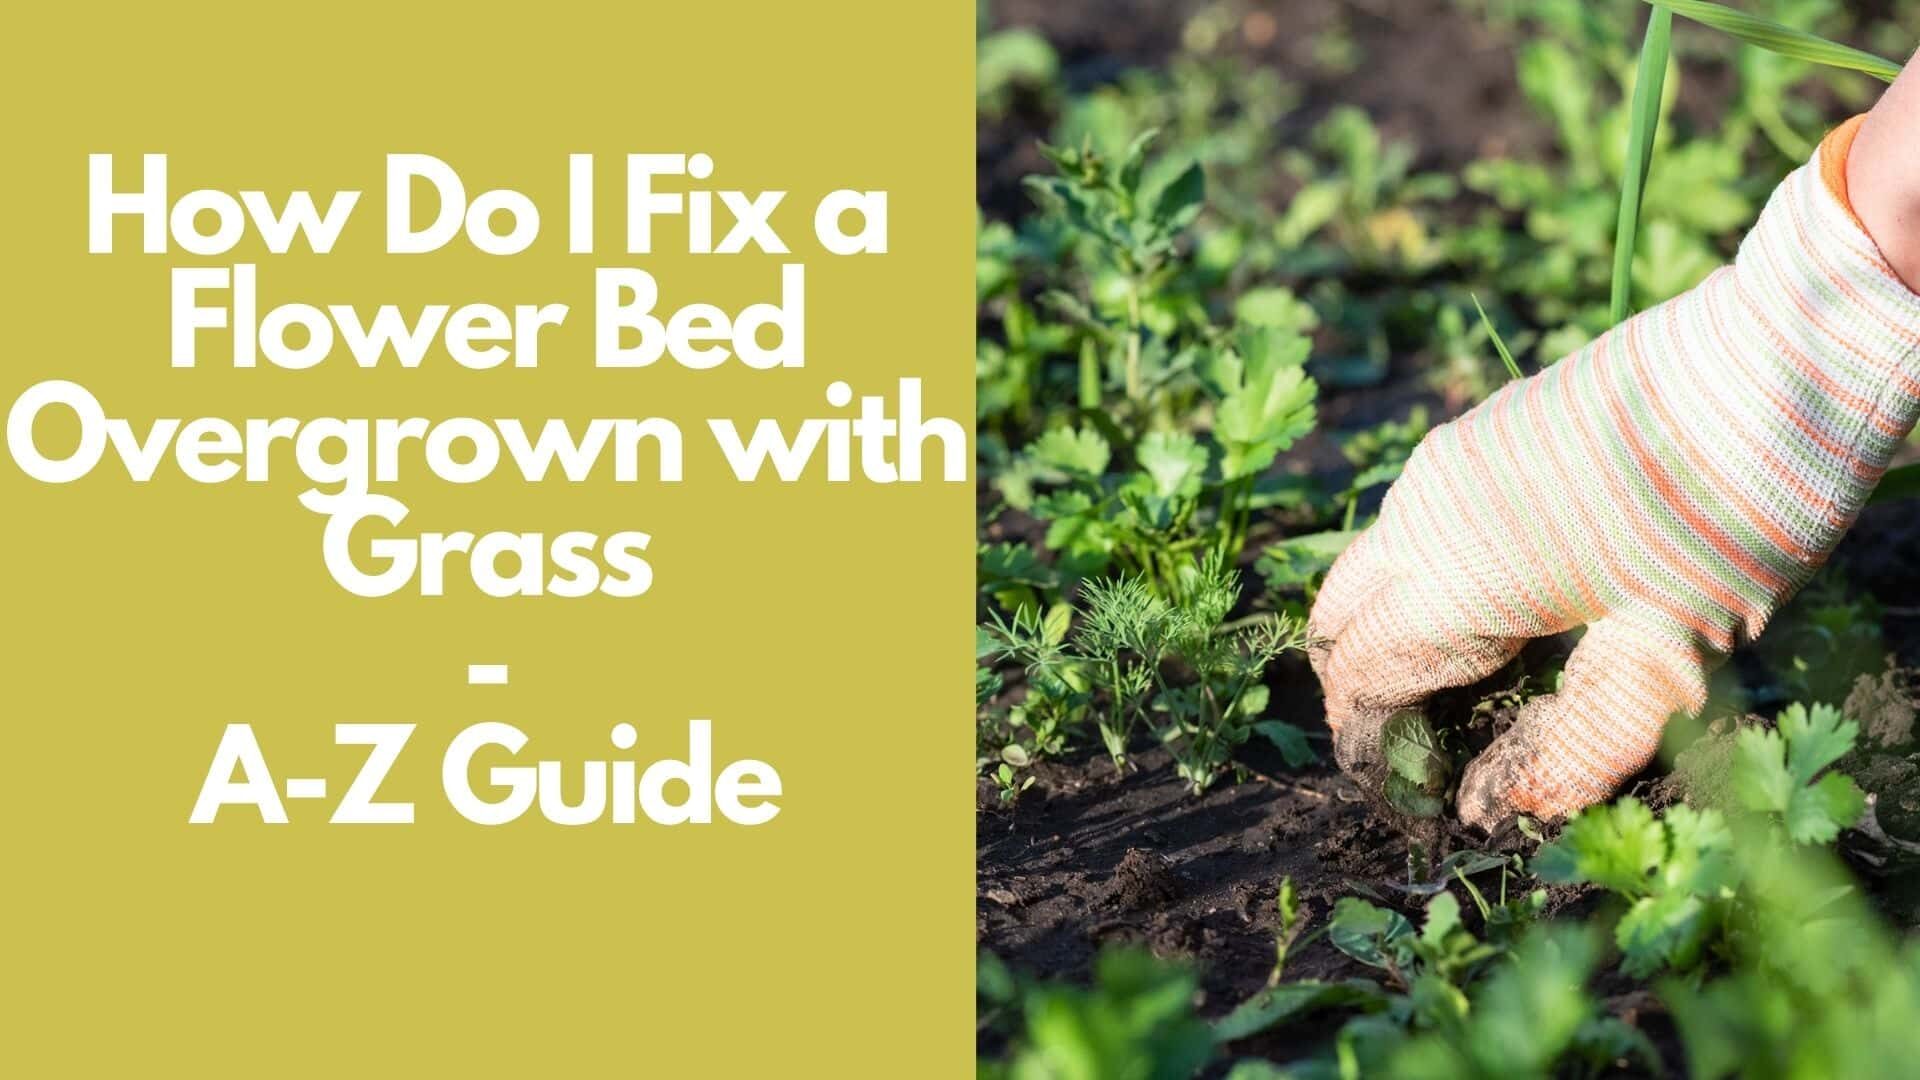 How Do I Fix a Flower Bed Overgrown with Grass: A-Z Guide 